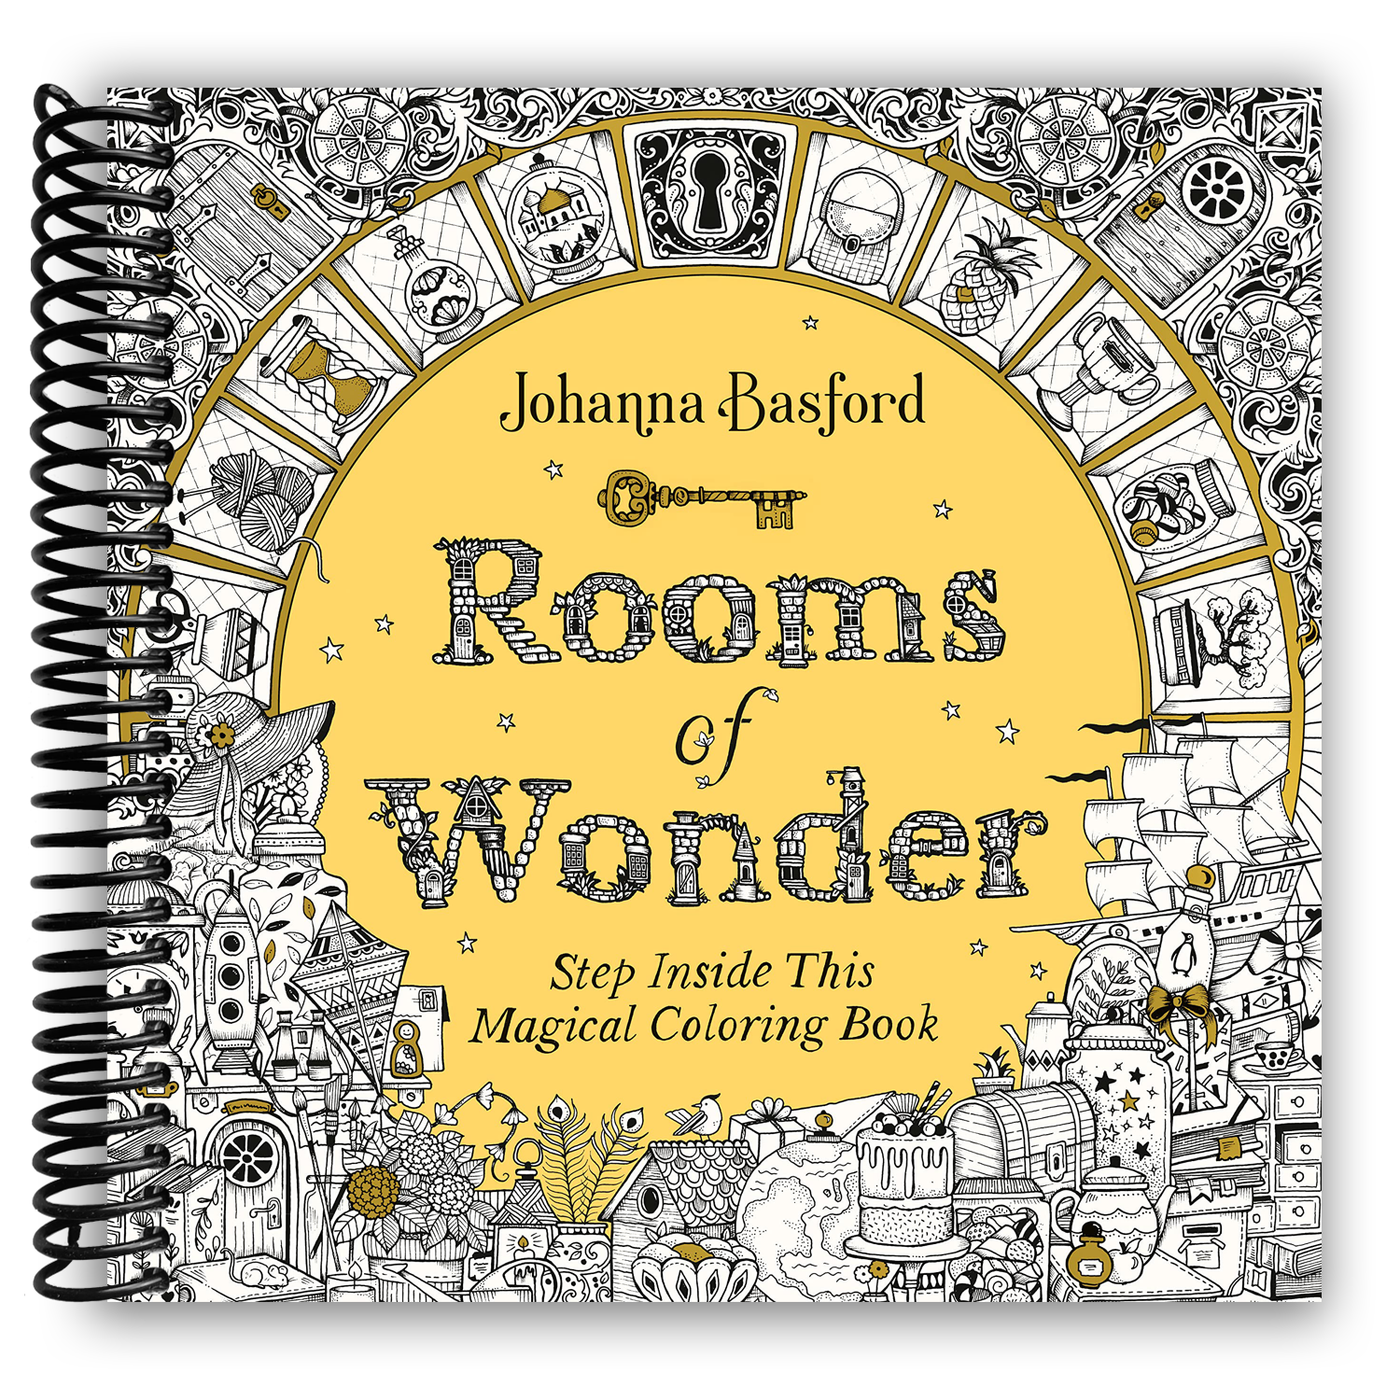 Rooms of Wonder: Step Inside This Magical Coloring Book (Spiral Bound)